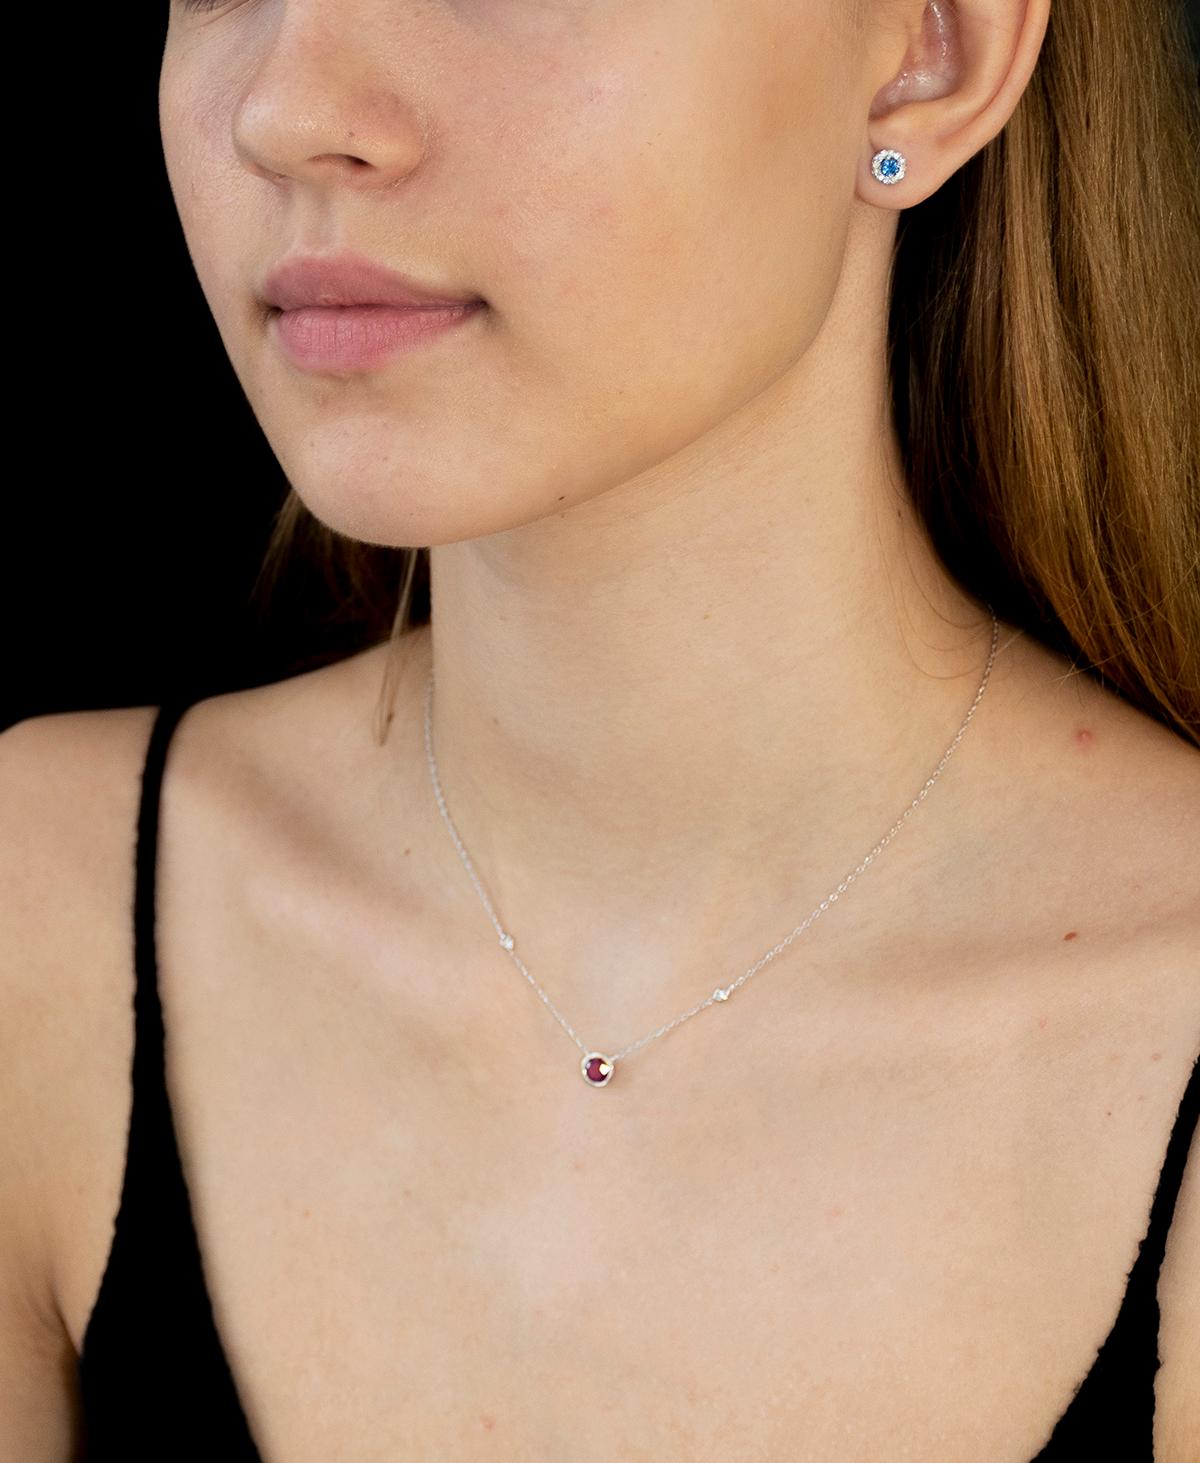 Featuring 14k white gold necklace pendant with bezel-set sideway pear shape ruby
Chain 16